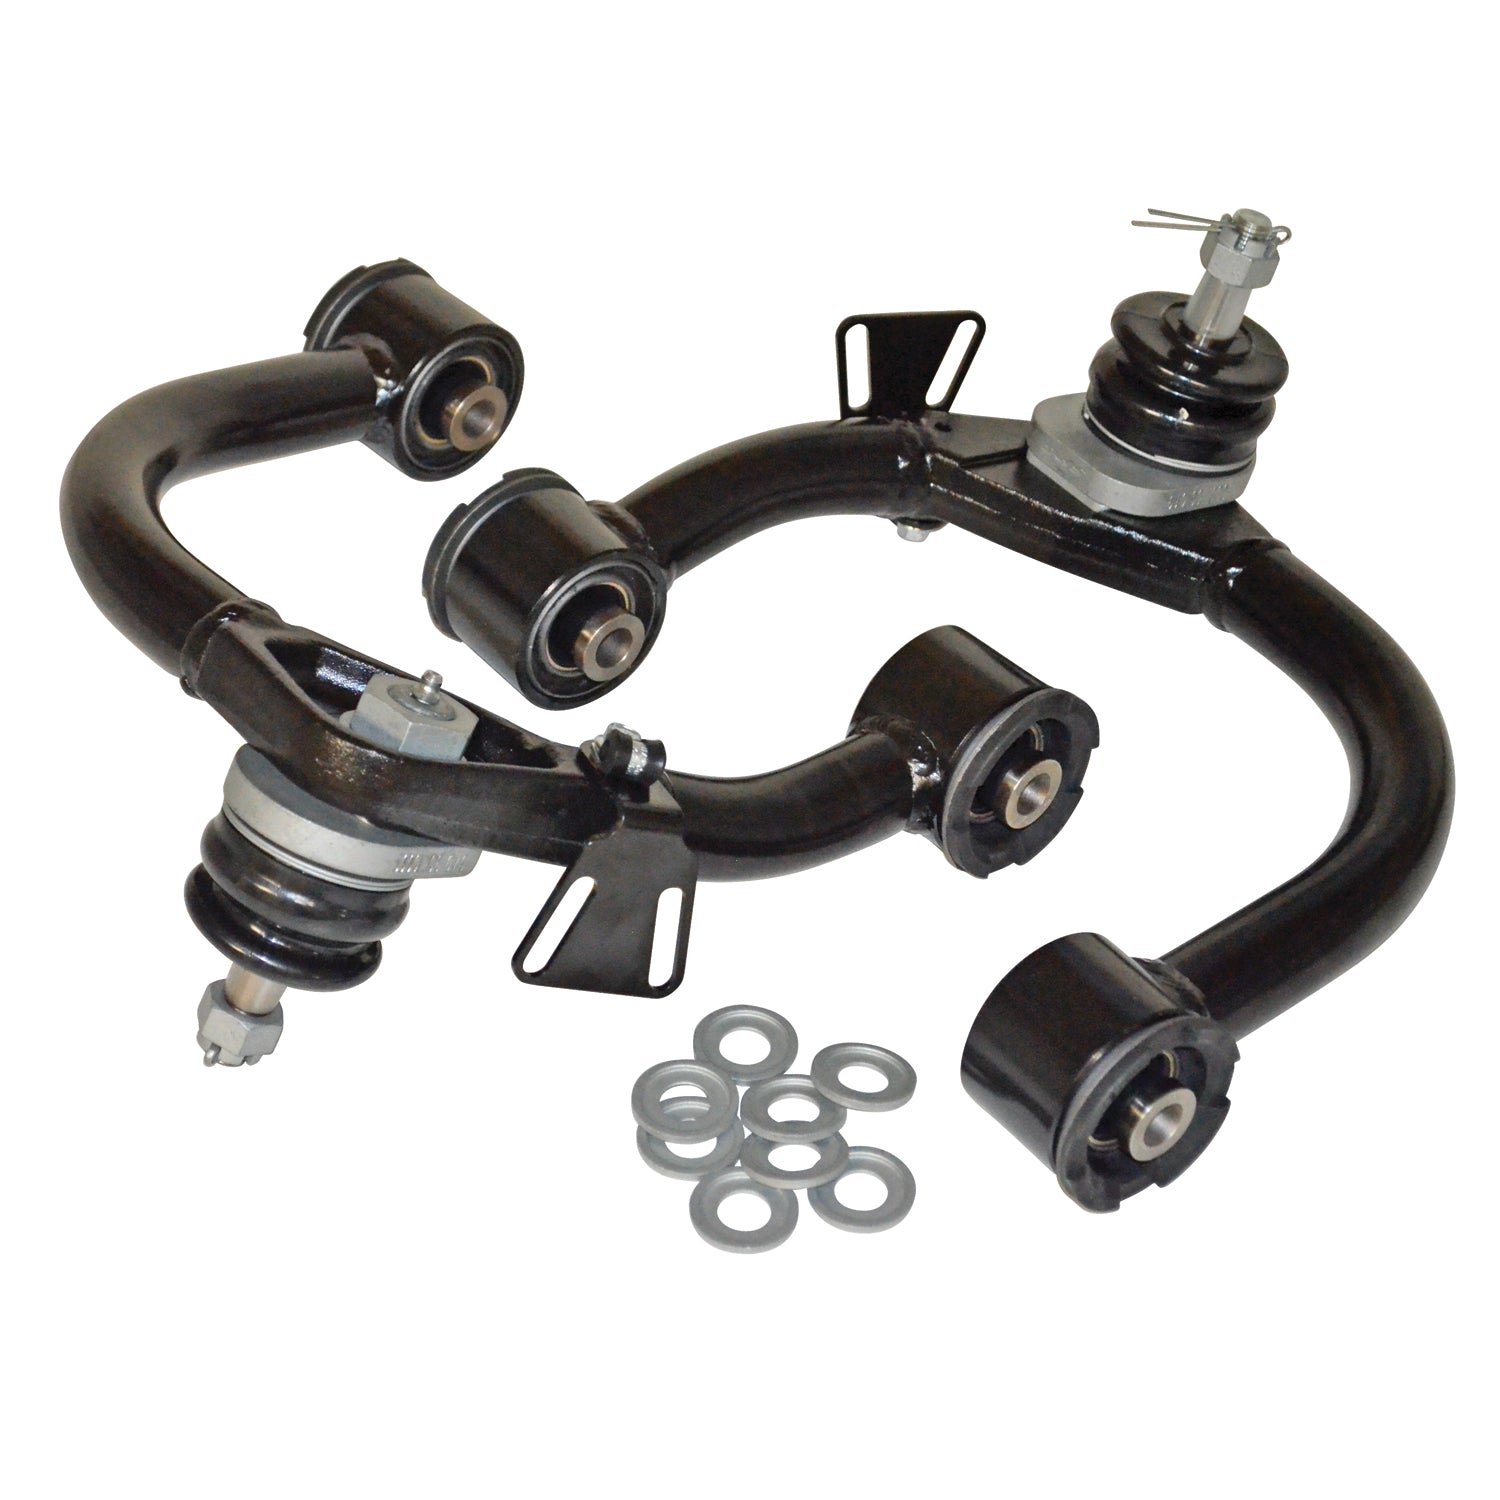 SPC Performance Front Upper Control Arms for 1998-2007 LX470 & 100 Series Land Cruiser (25455)